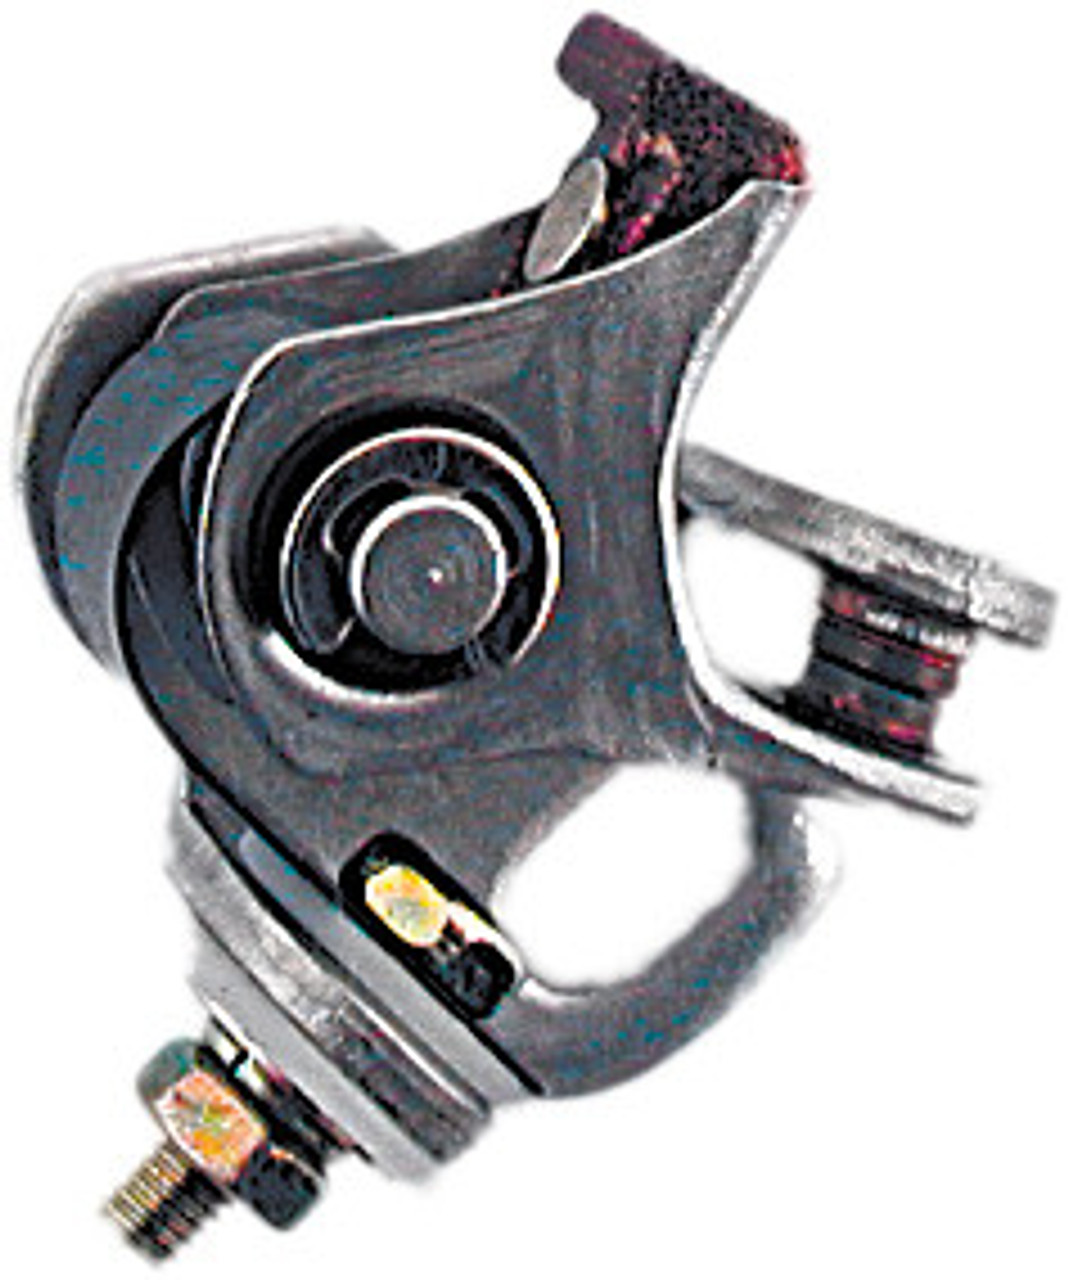 Ignition Point compatible with Arctic Cat, Yamaha Part# 44-03009 OEM# 3000-182, 806-81322-20